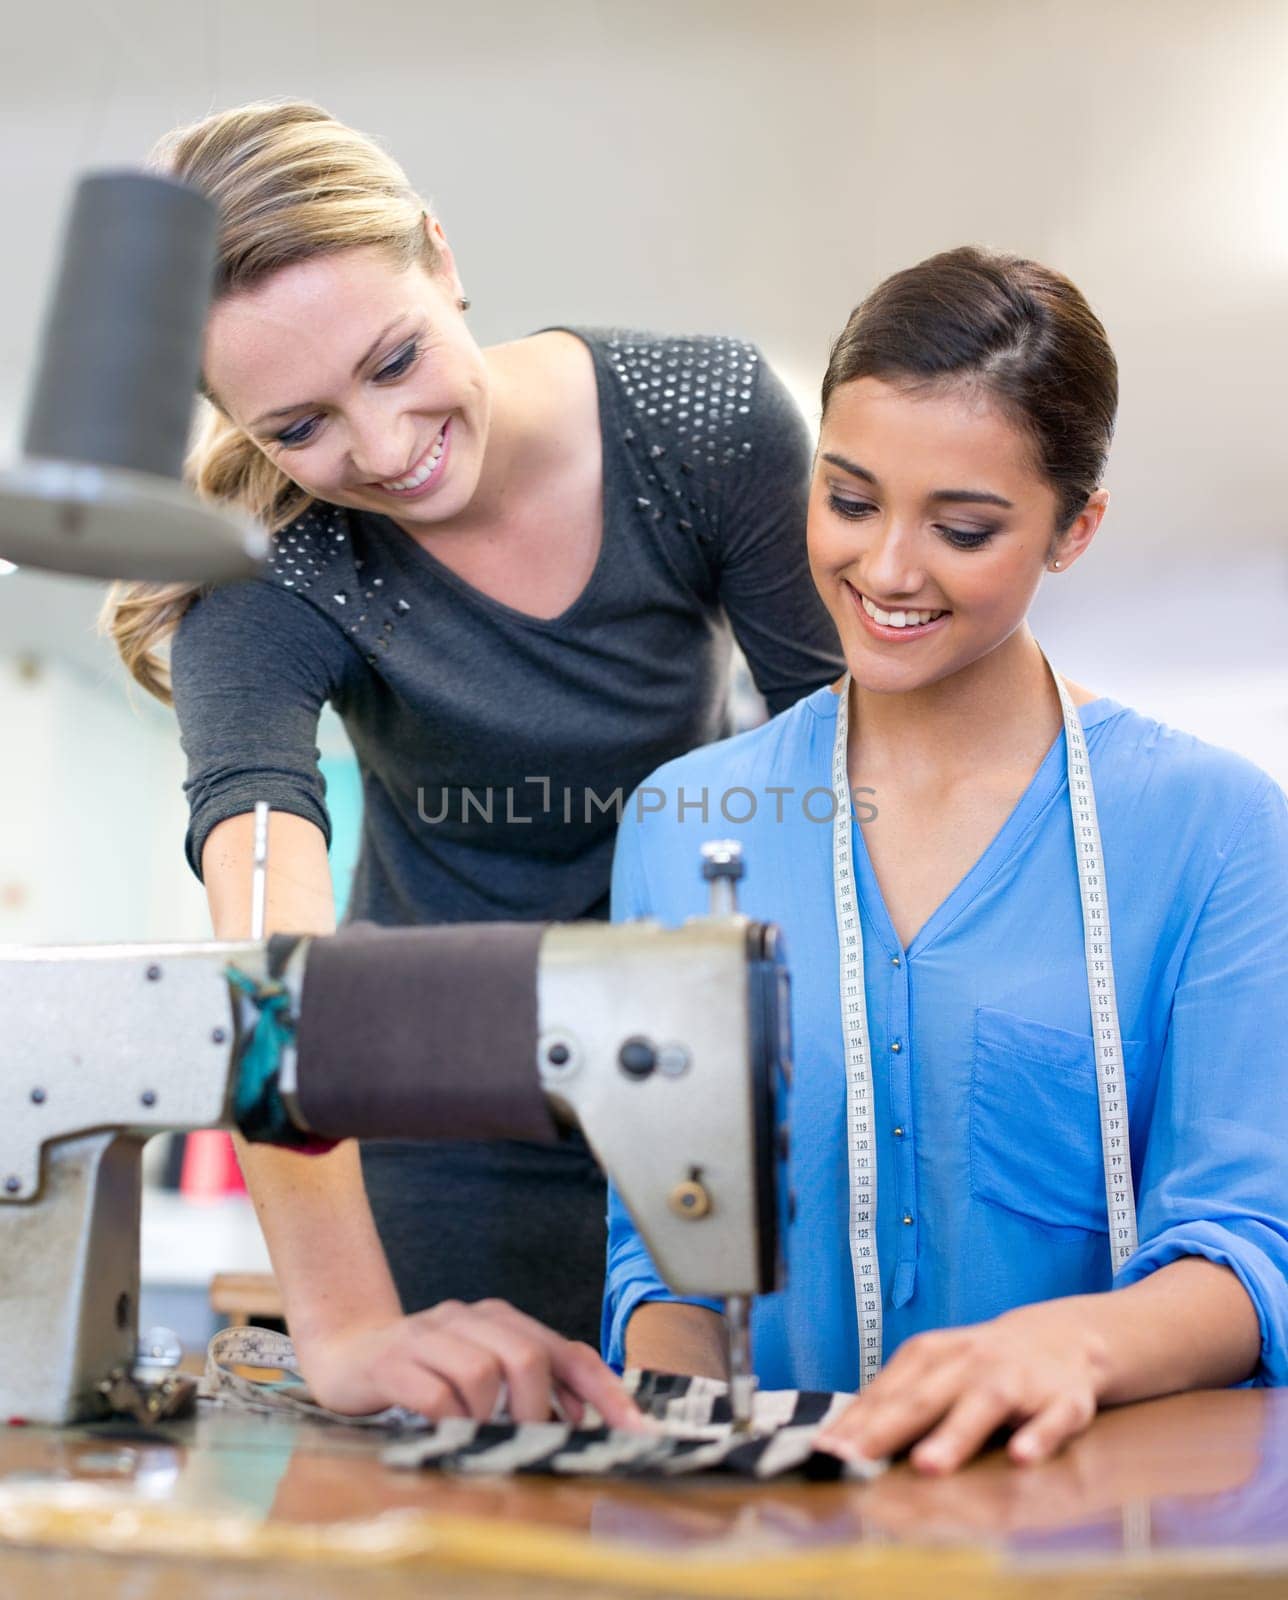 Designers, collaboration and sewing machine for manufacturing, coworkers and tailor on fabric. Women, teamwork and support on textile in clothing business, fashion planning and partnership on style.